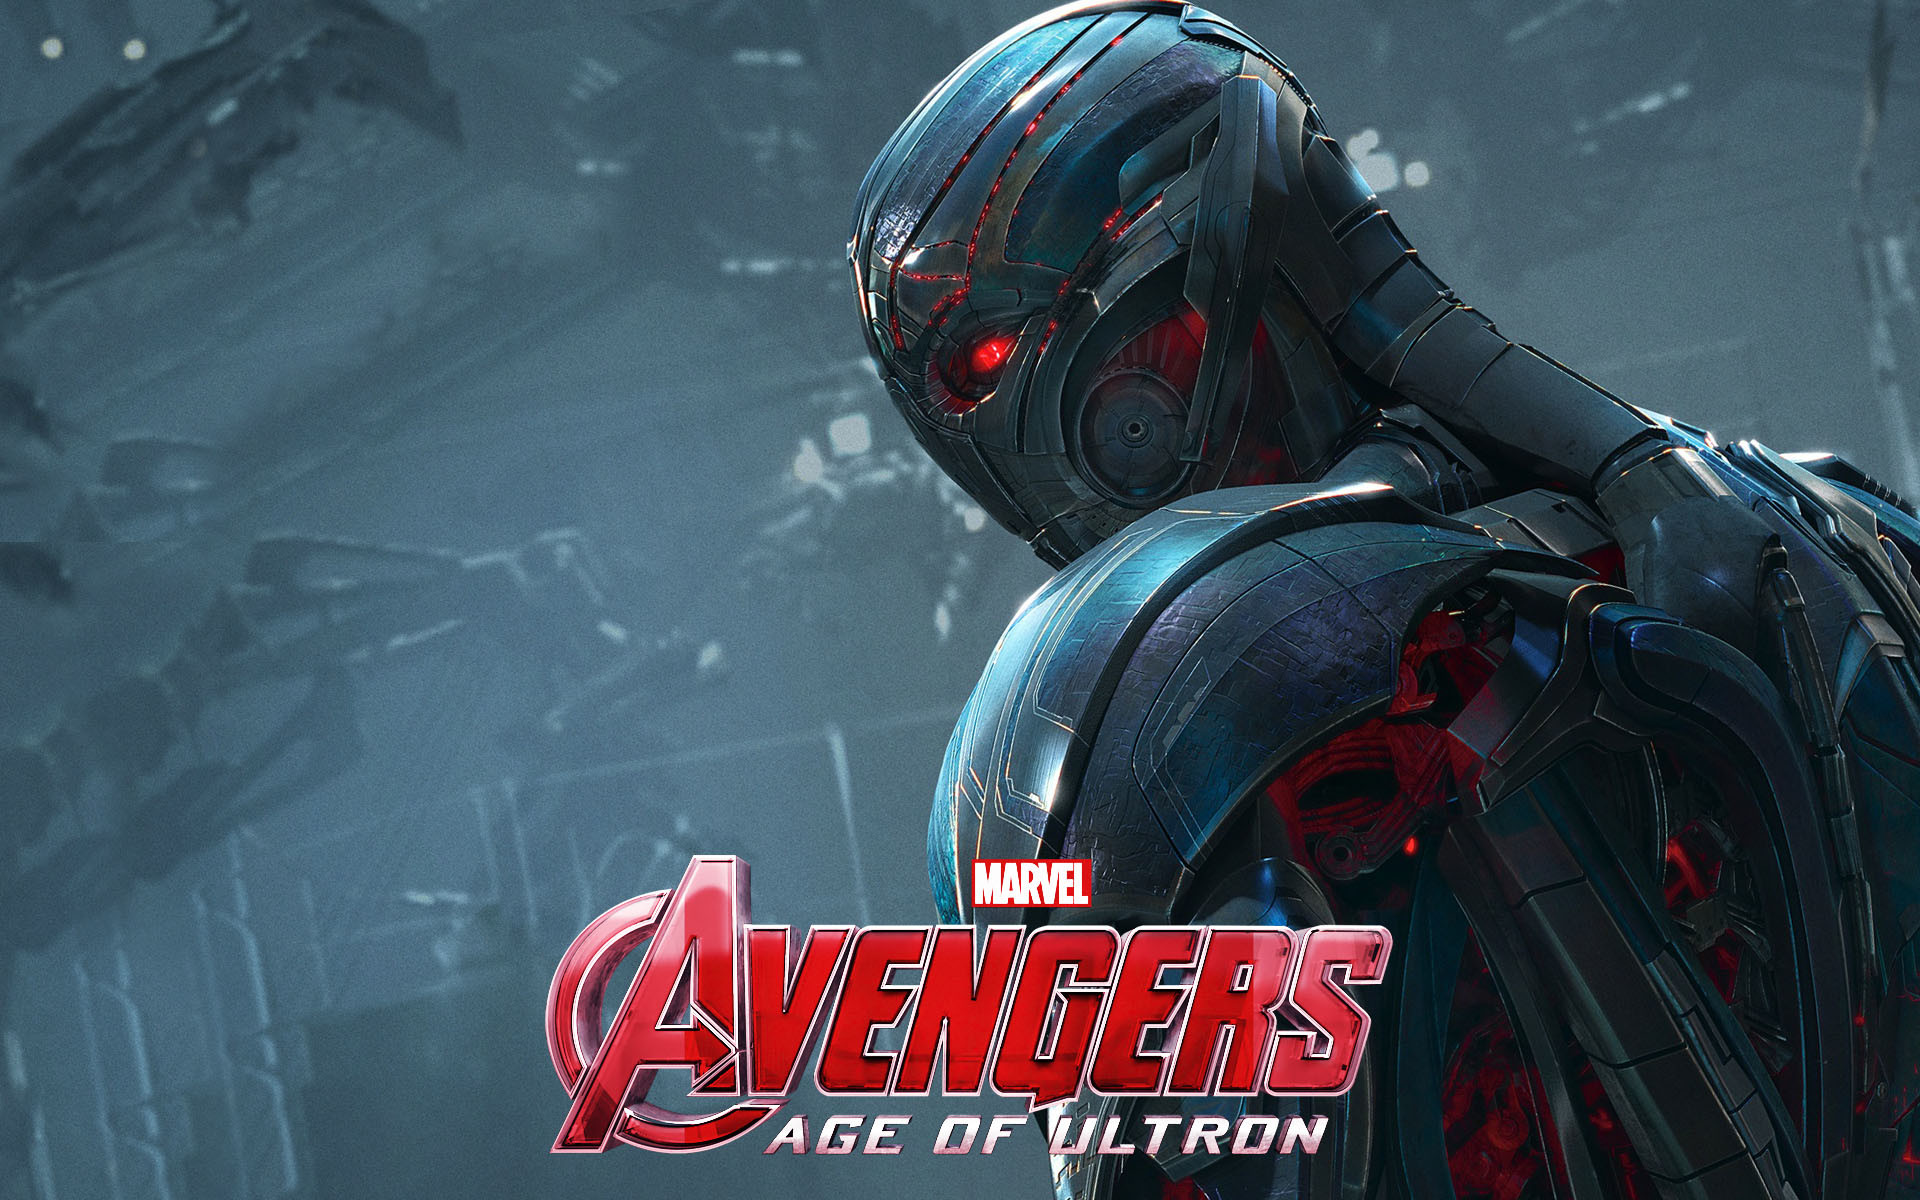 142 Avengers Age Of Ultron Images, Photos, Reviews